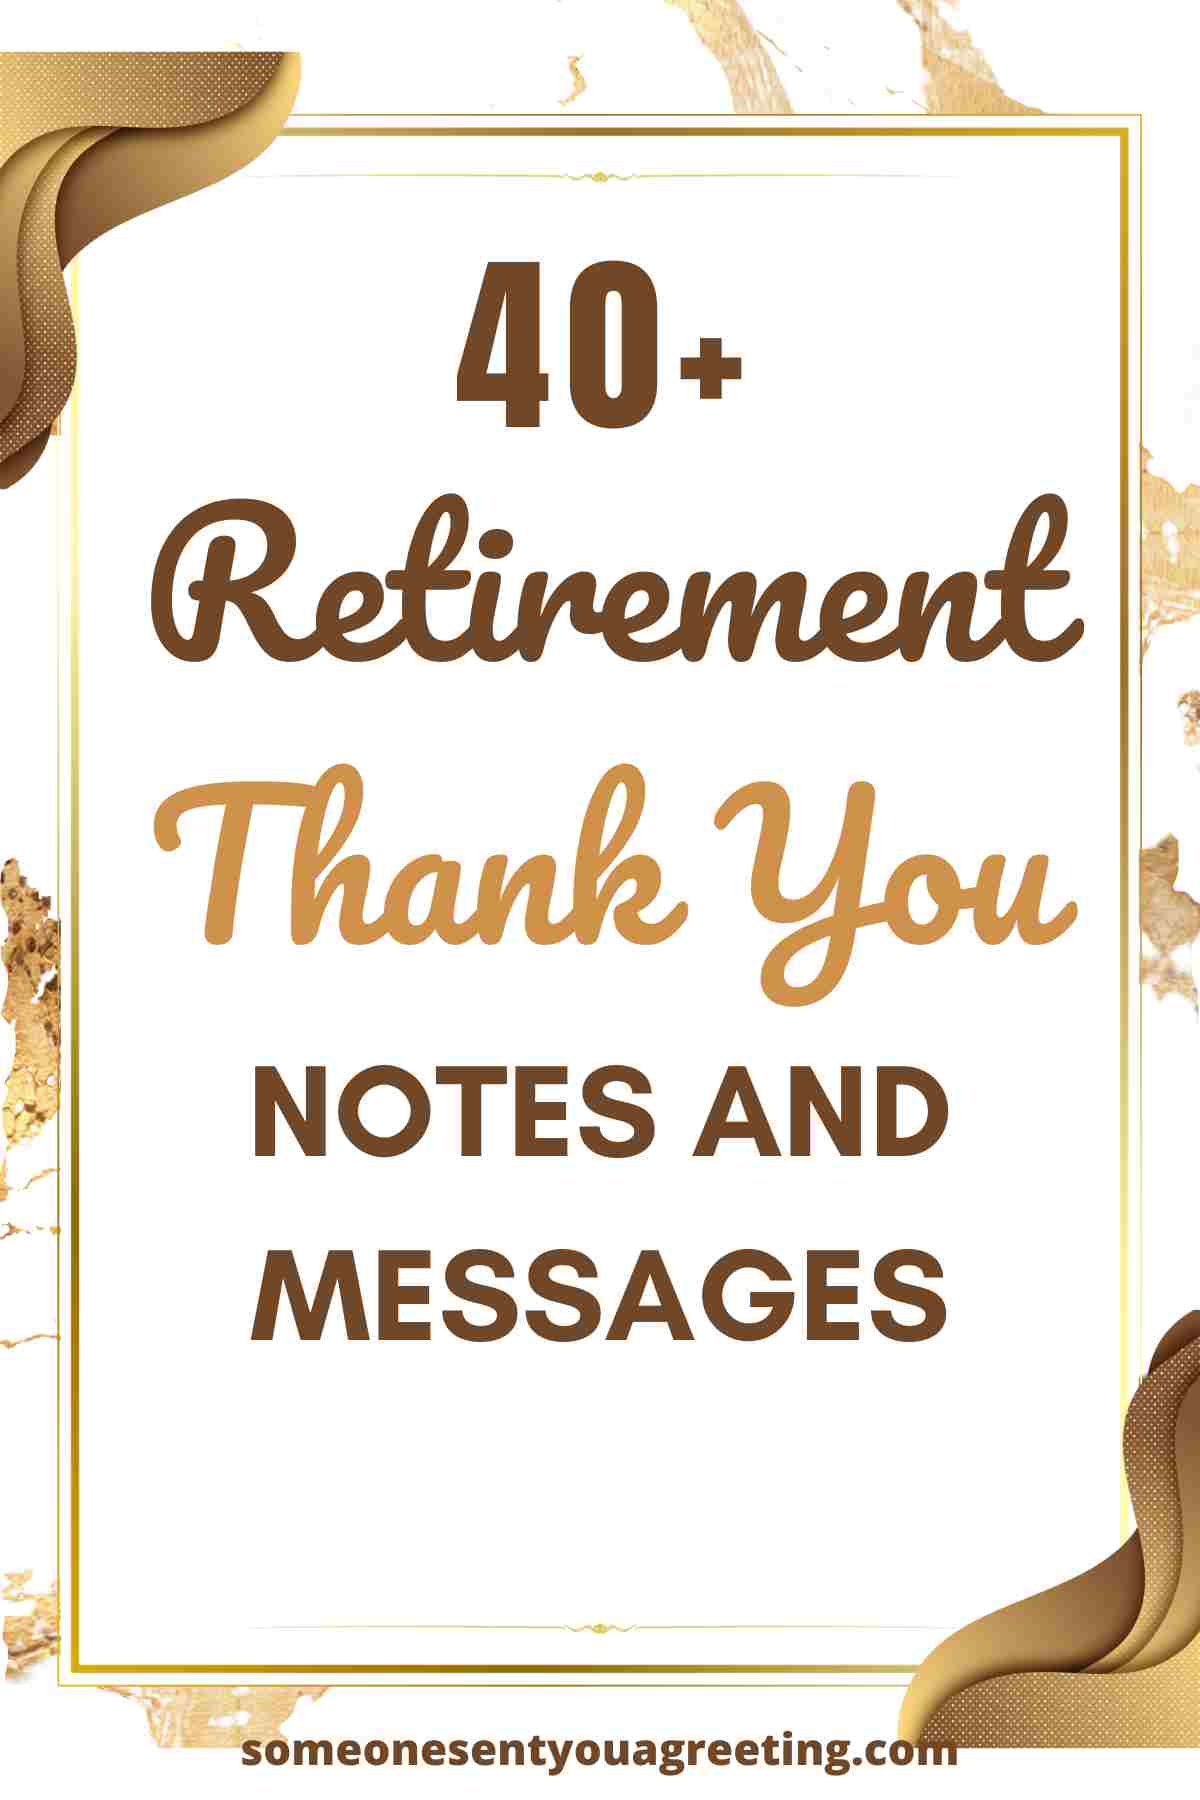 retirement thank you notes and messages